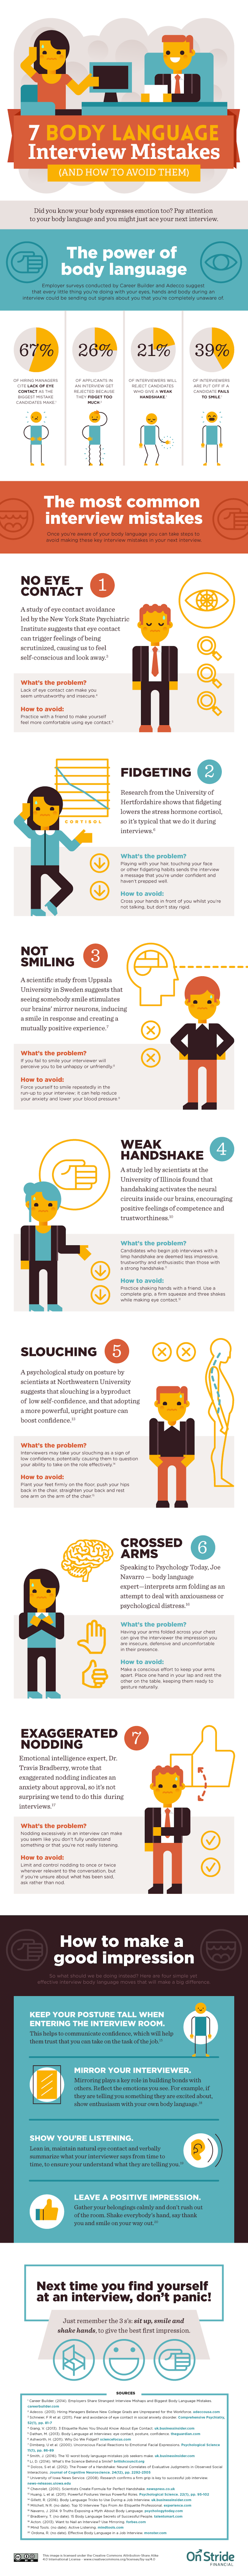 7-body-language-interview-mistakes-and-how-to-avoid-them_RECRUITER